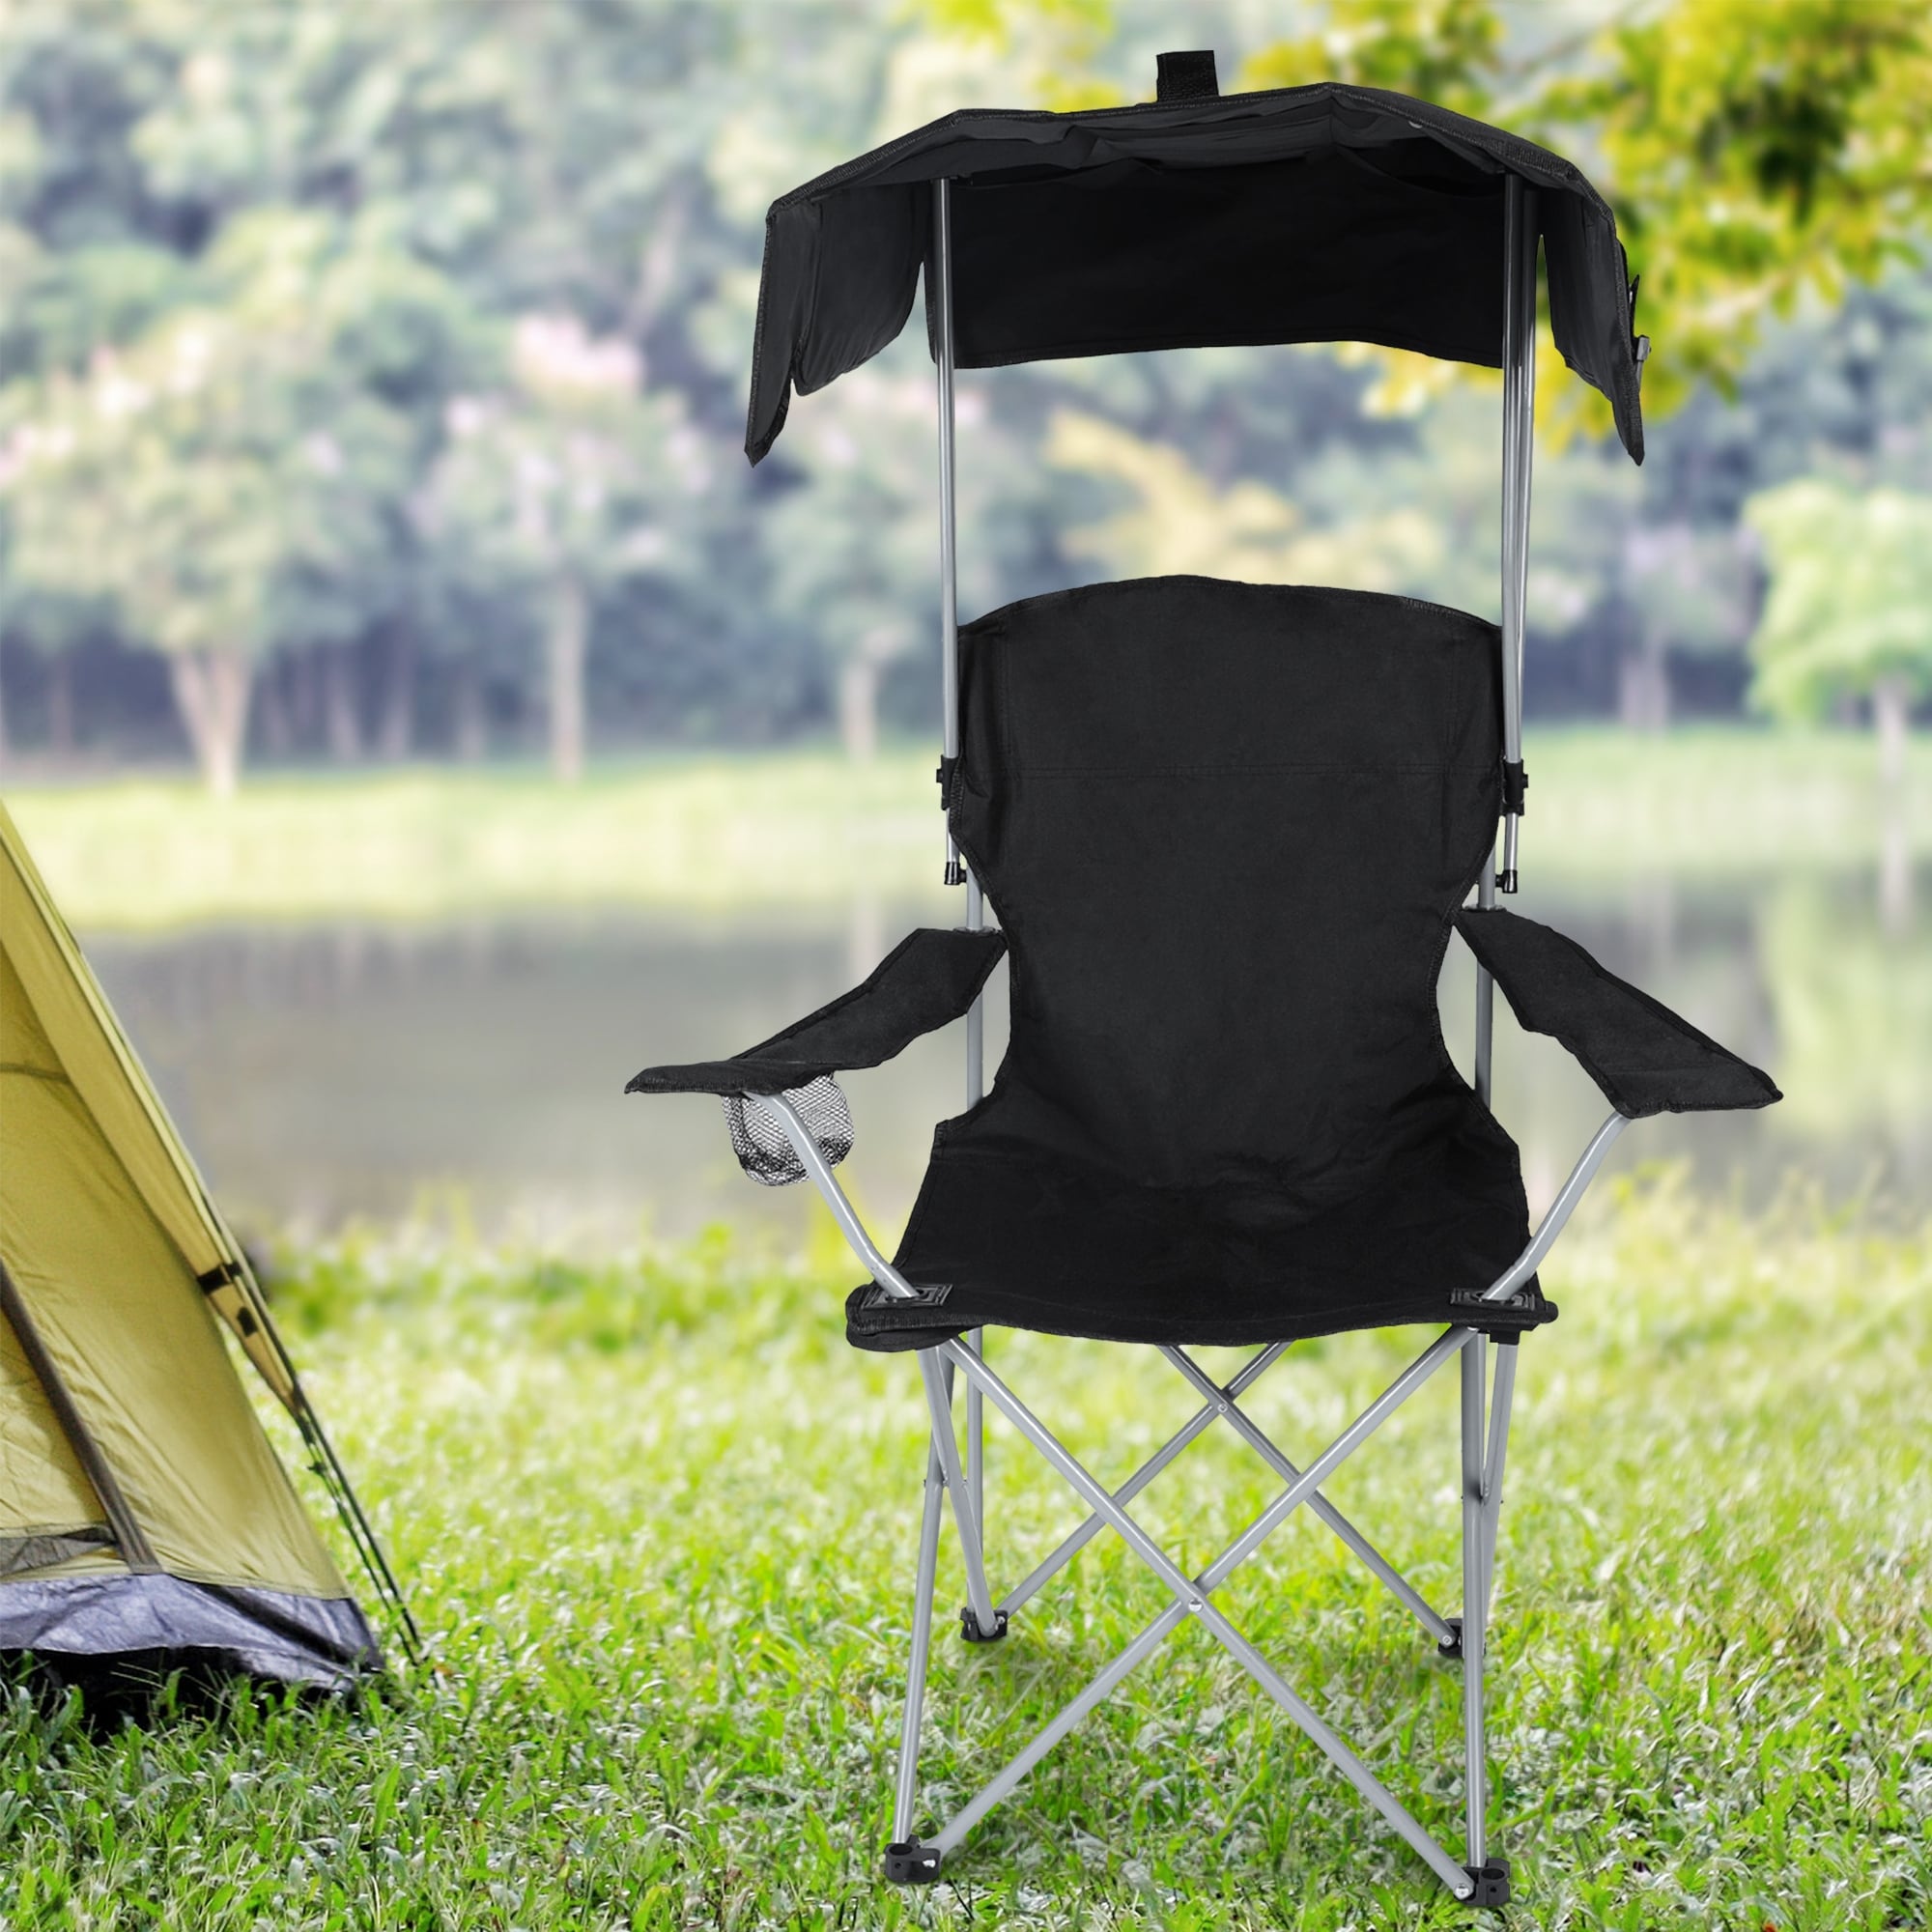 Foldable Beach Canopy Chair Sun Protection Camping Lawn Canopy